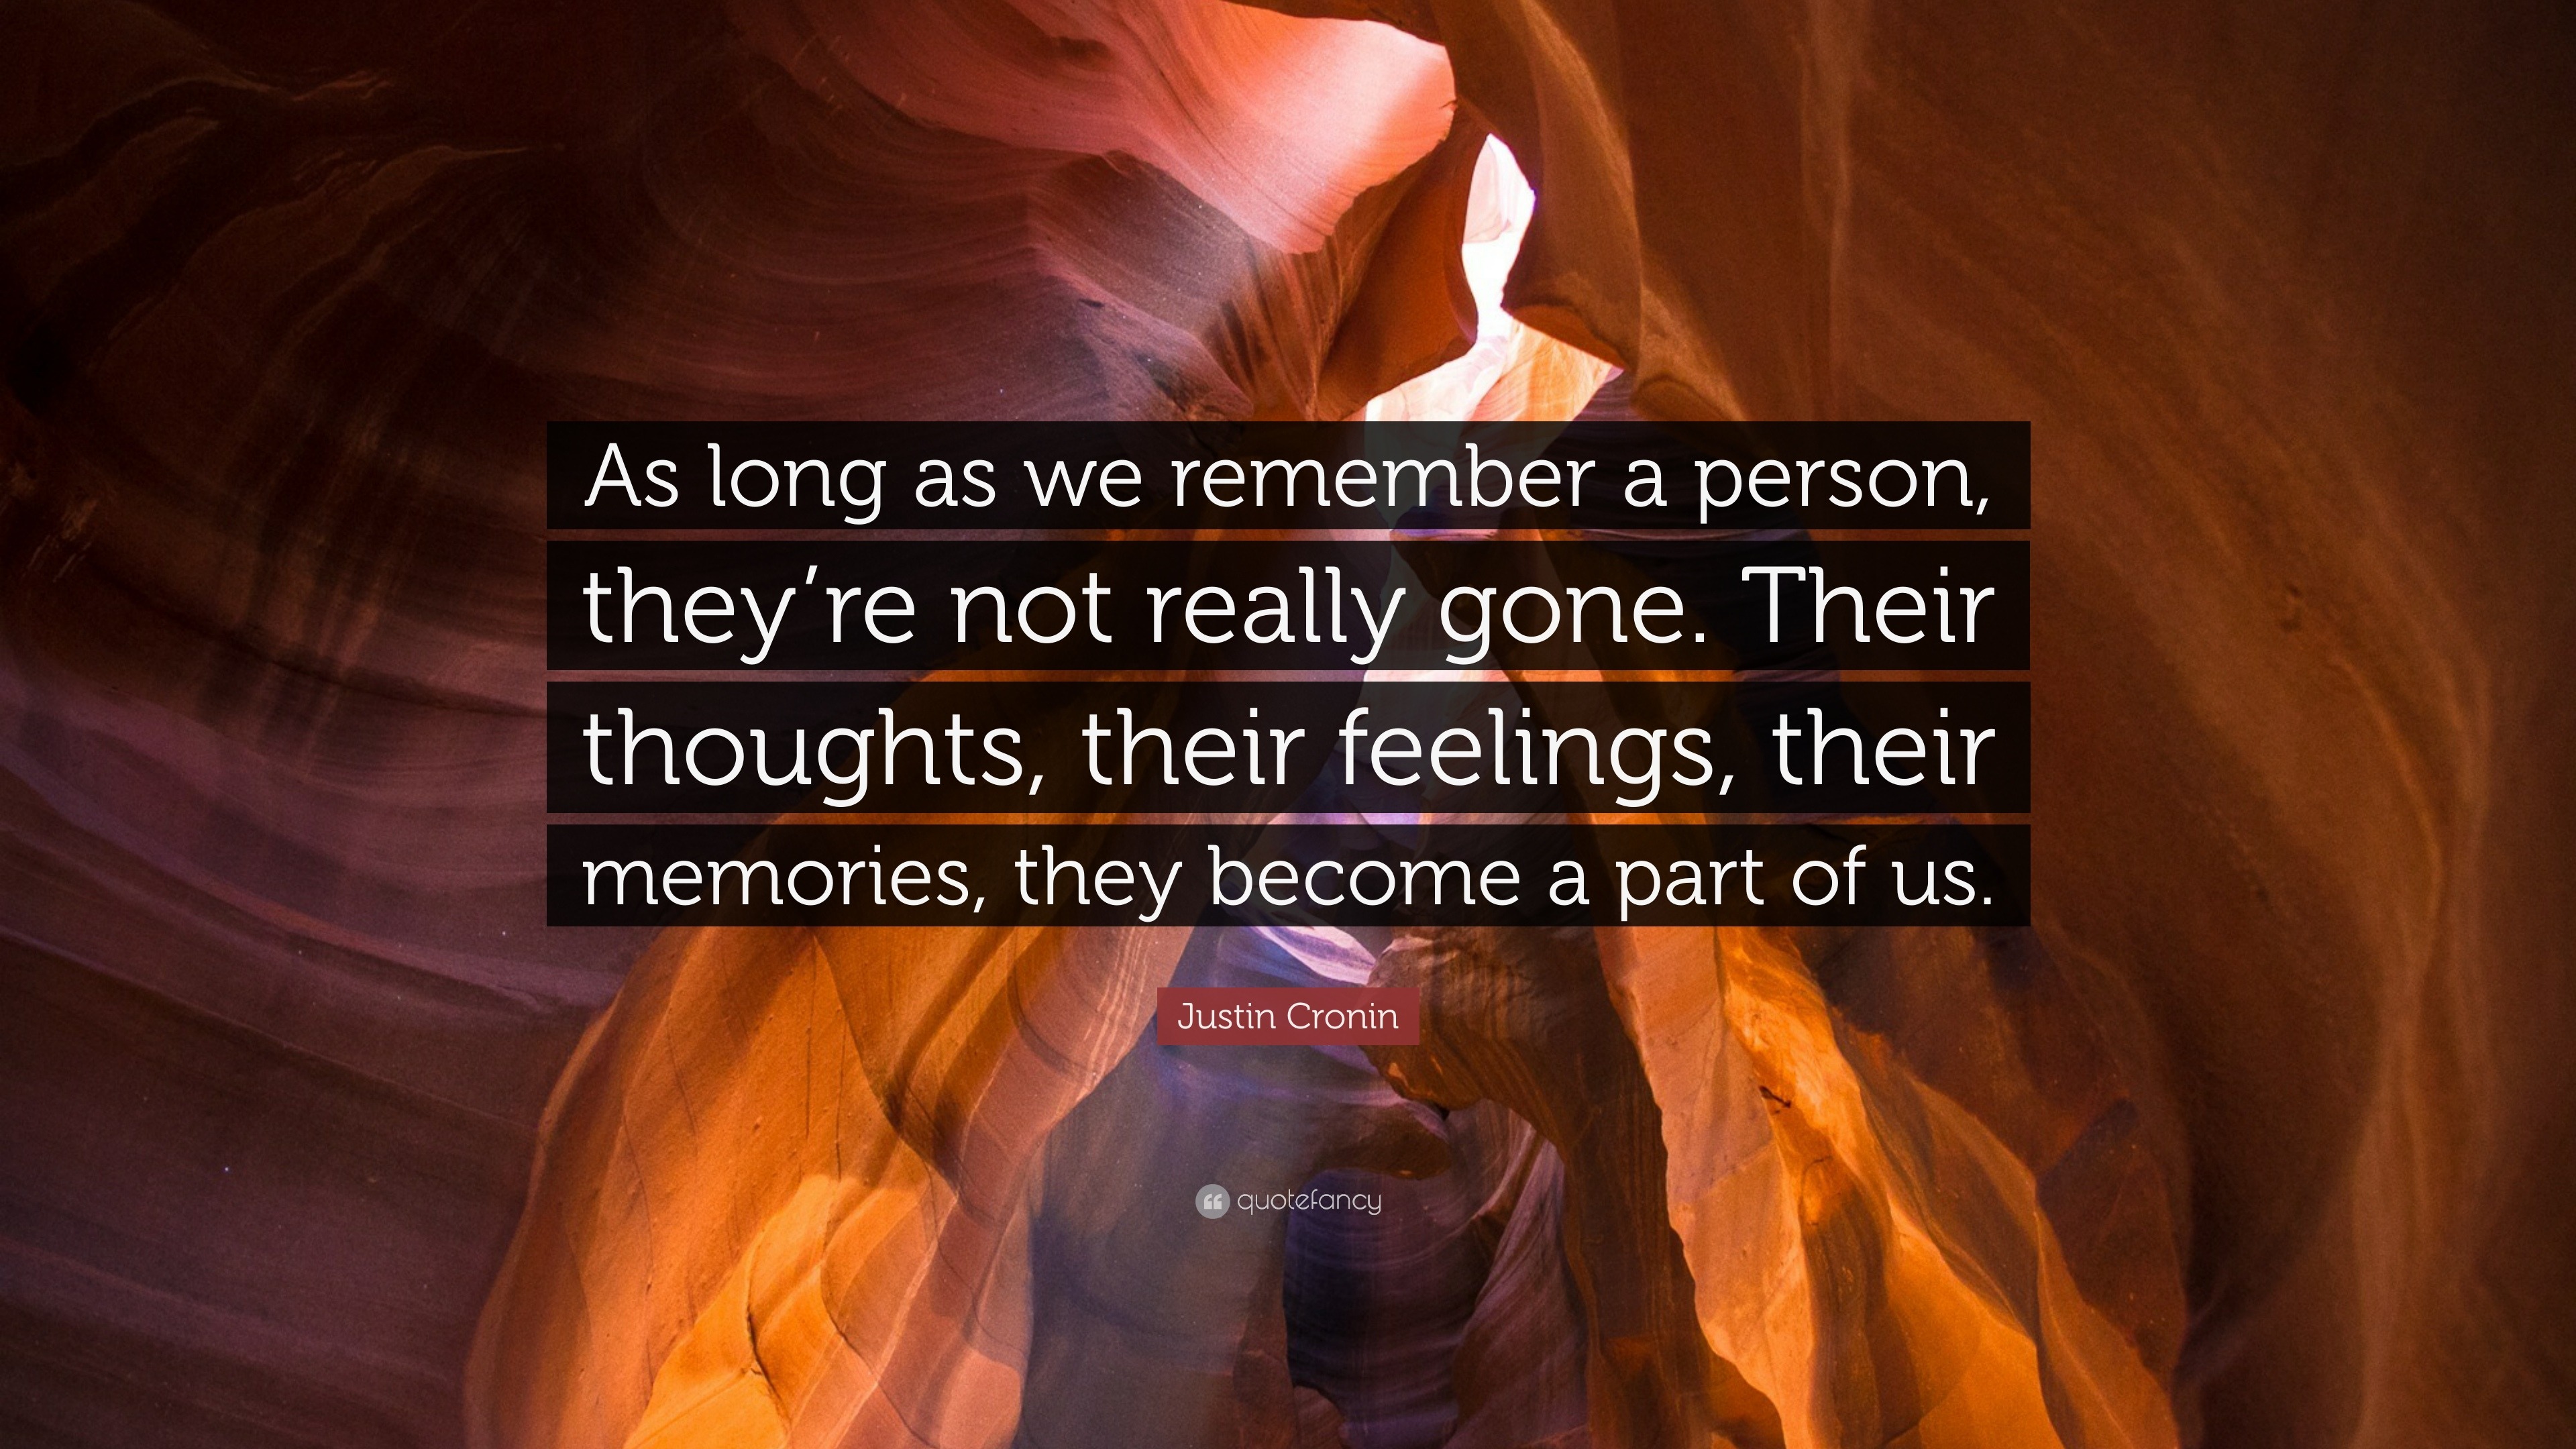 Justin Cronin Quote As Long As We Remember A Person They Re Not Really Gone Their Thoughts Their Feelings Their Memories They Become A